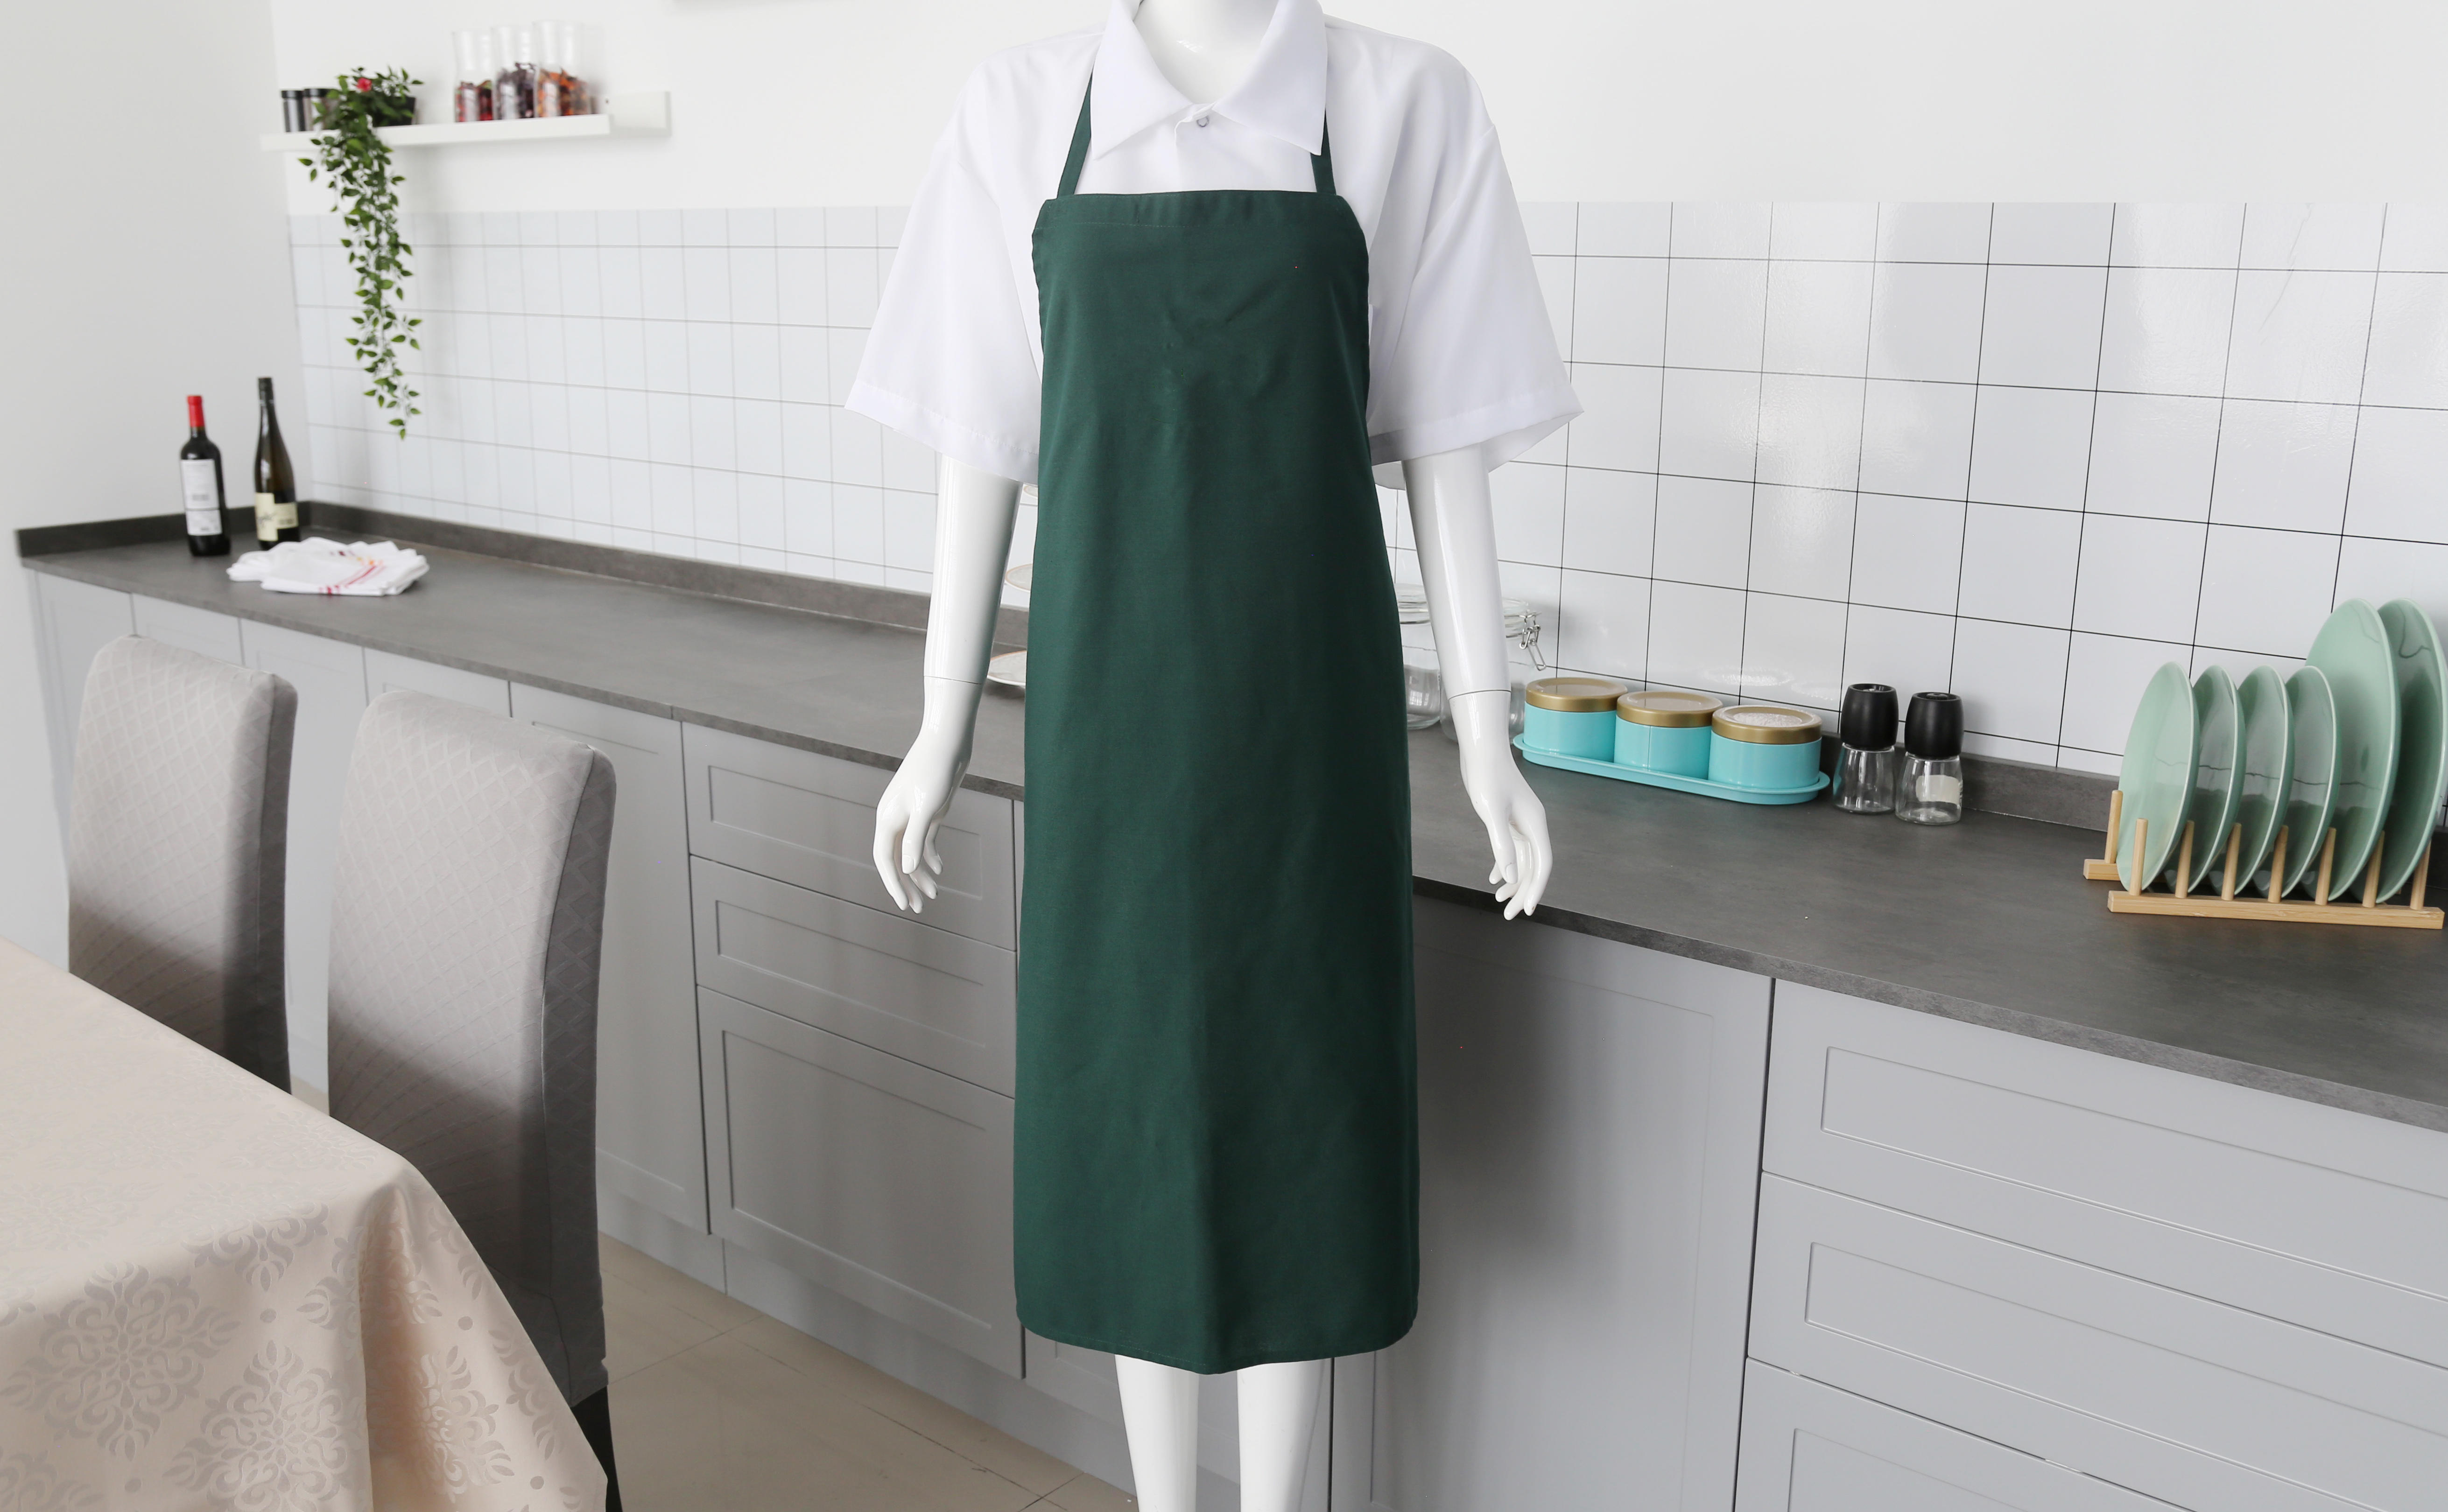 Forest Green Polyester Bib Apron Without Pocket